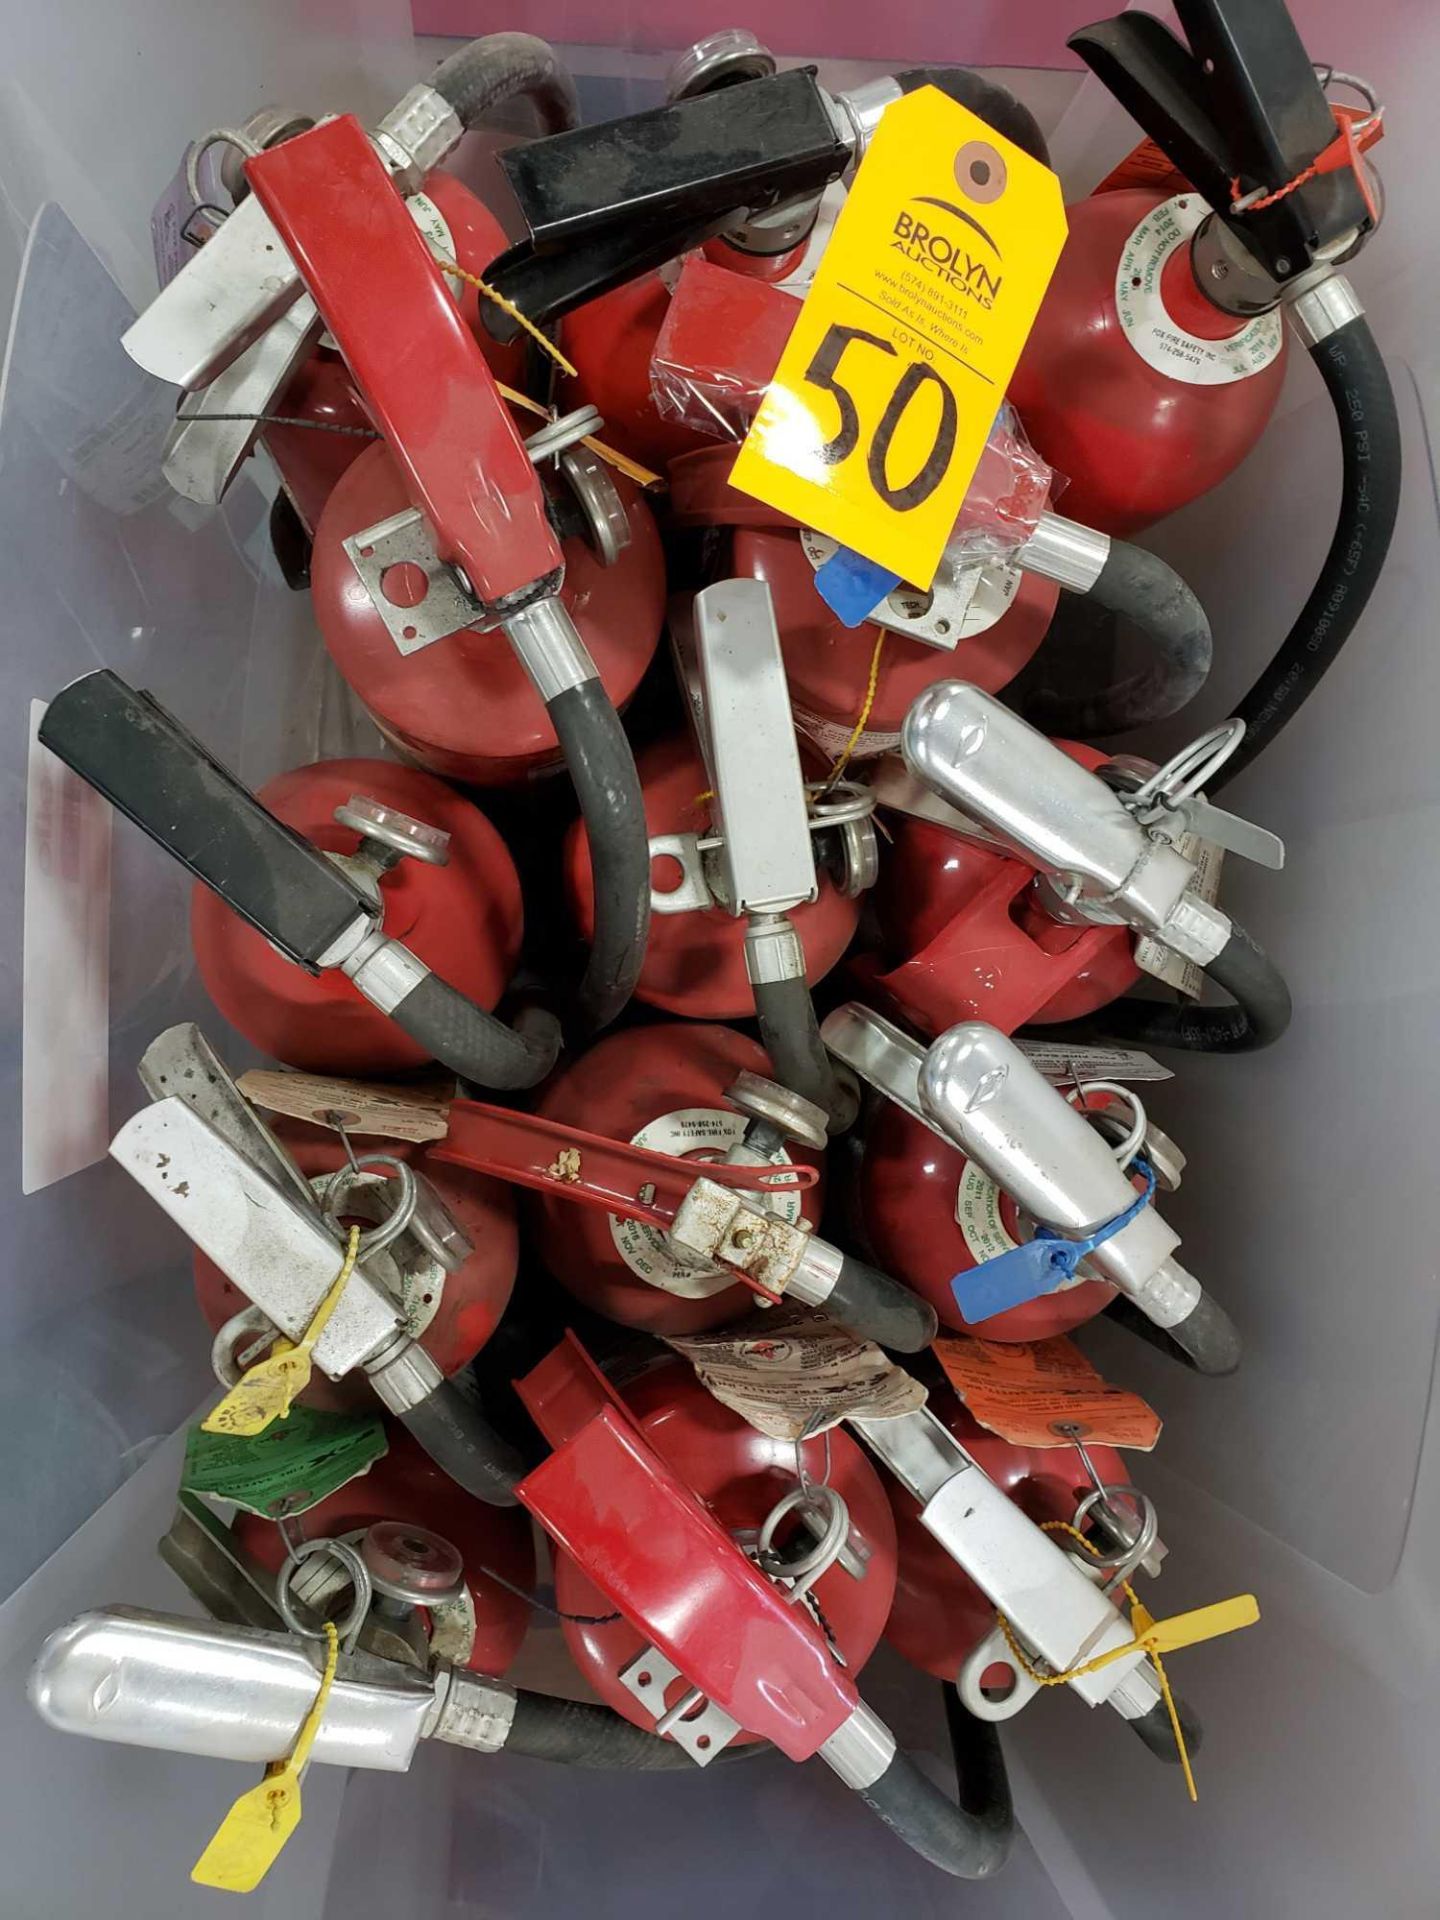 Qty 14 - Fire extinguishers. - Image 2 of 2